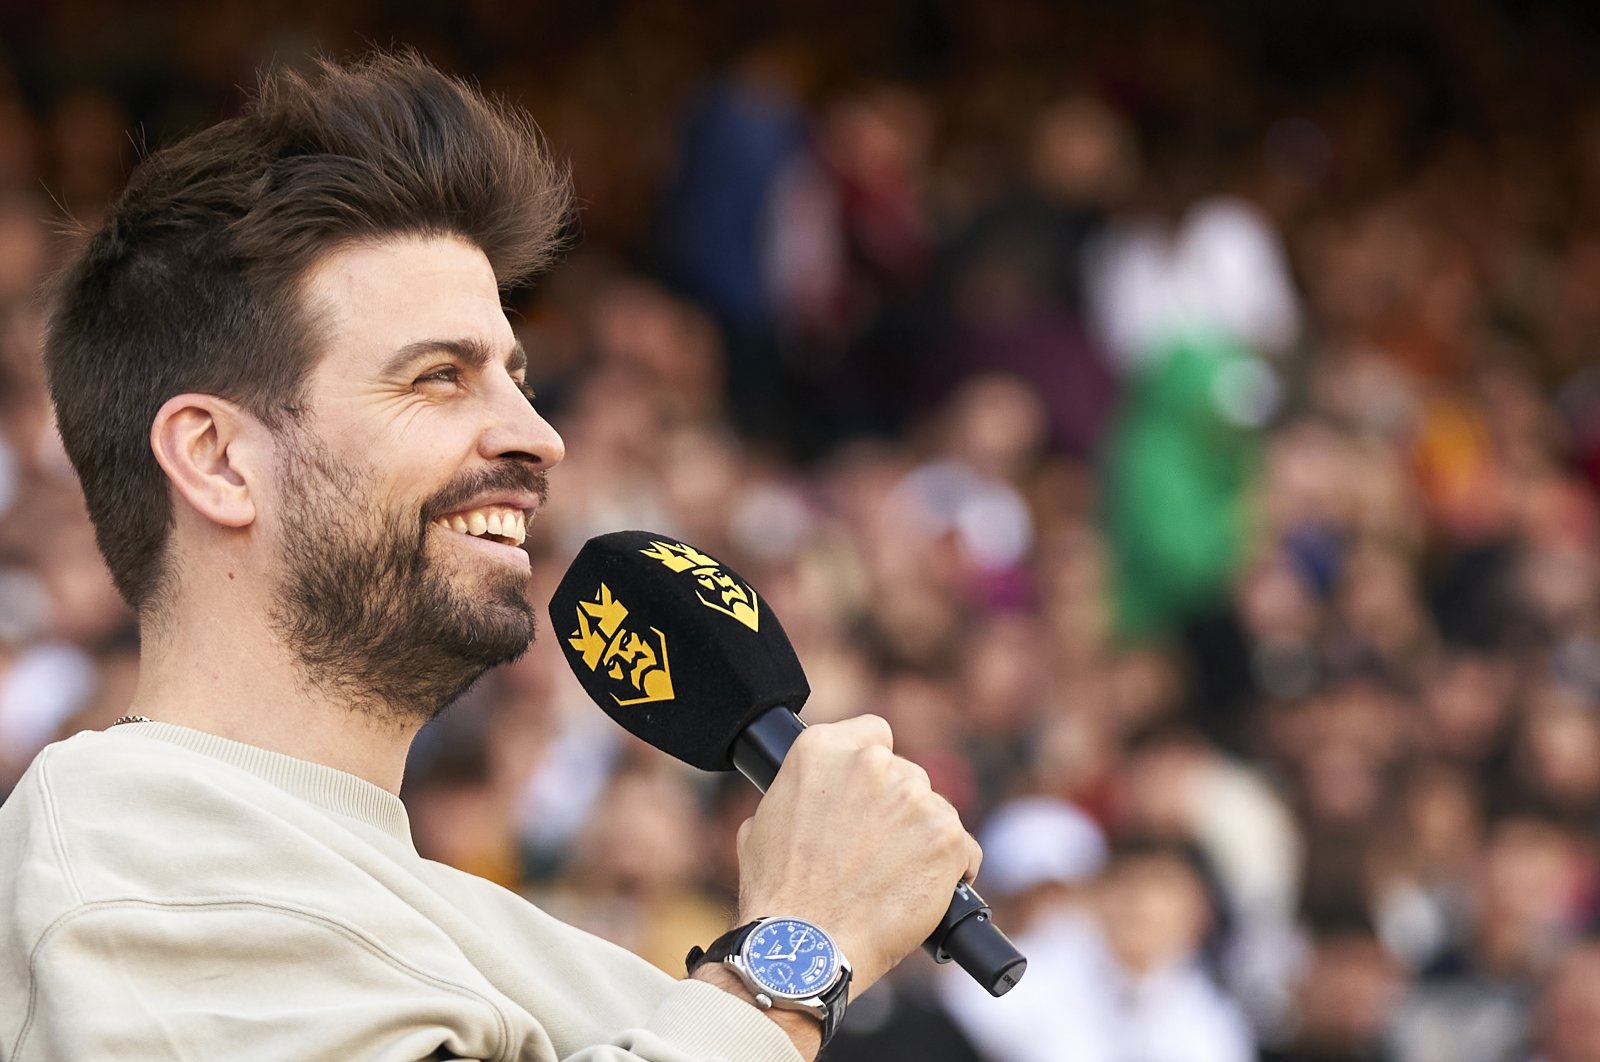 Gerard Pique, president of Kings League reacts during the Final Four of the Kings League Tournament 2023 at Spotify Camp Nou, Barcelona, Spain, March 26, 2023. (Getty Images Photo)